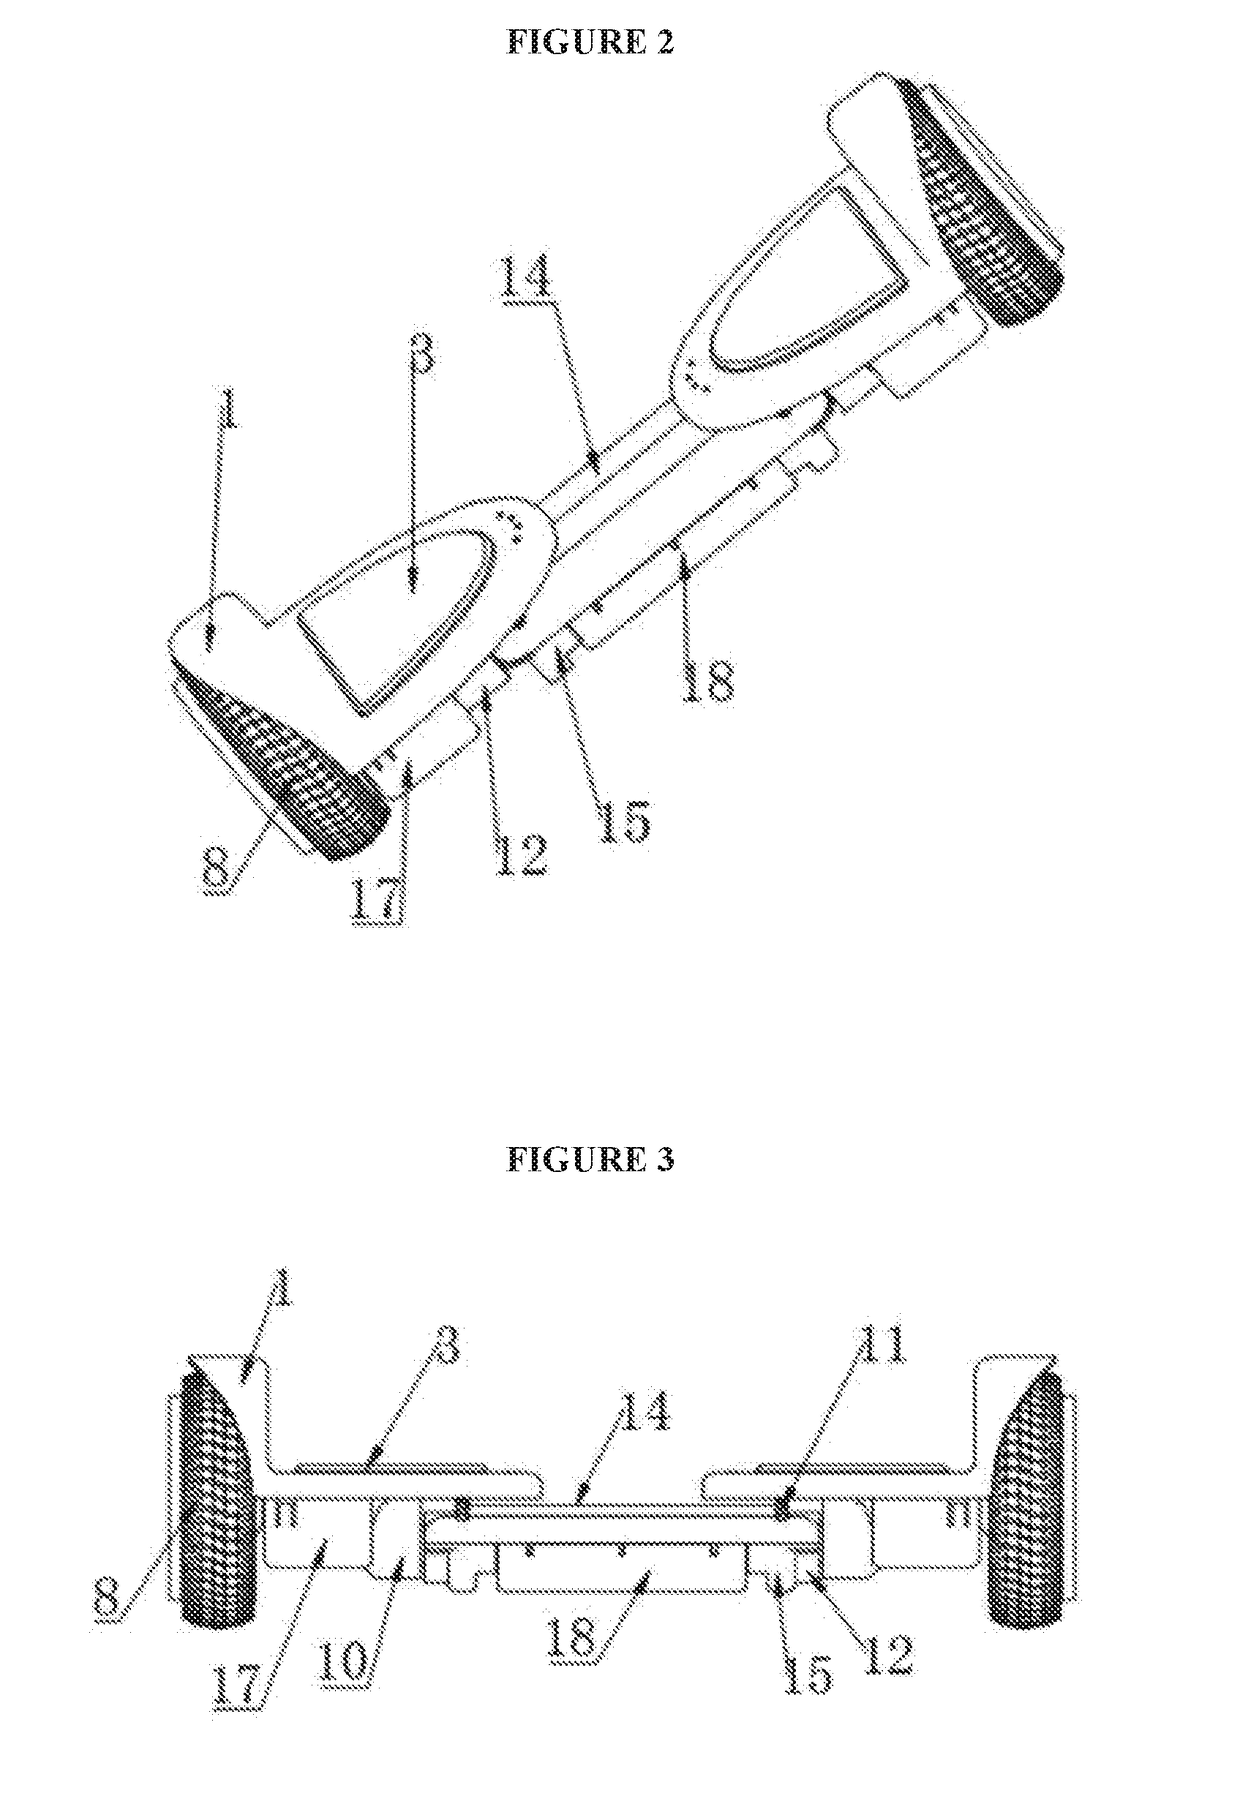 Two-axle vehicle balance scooter